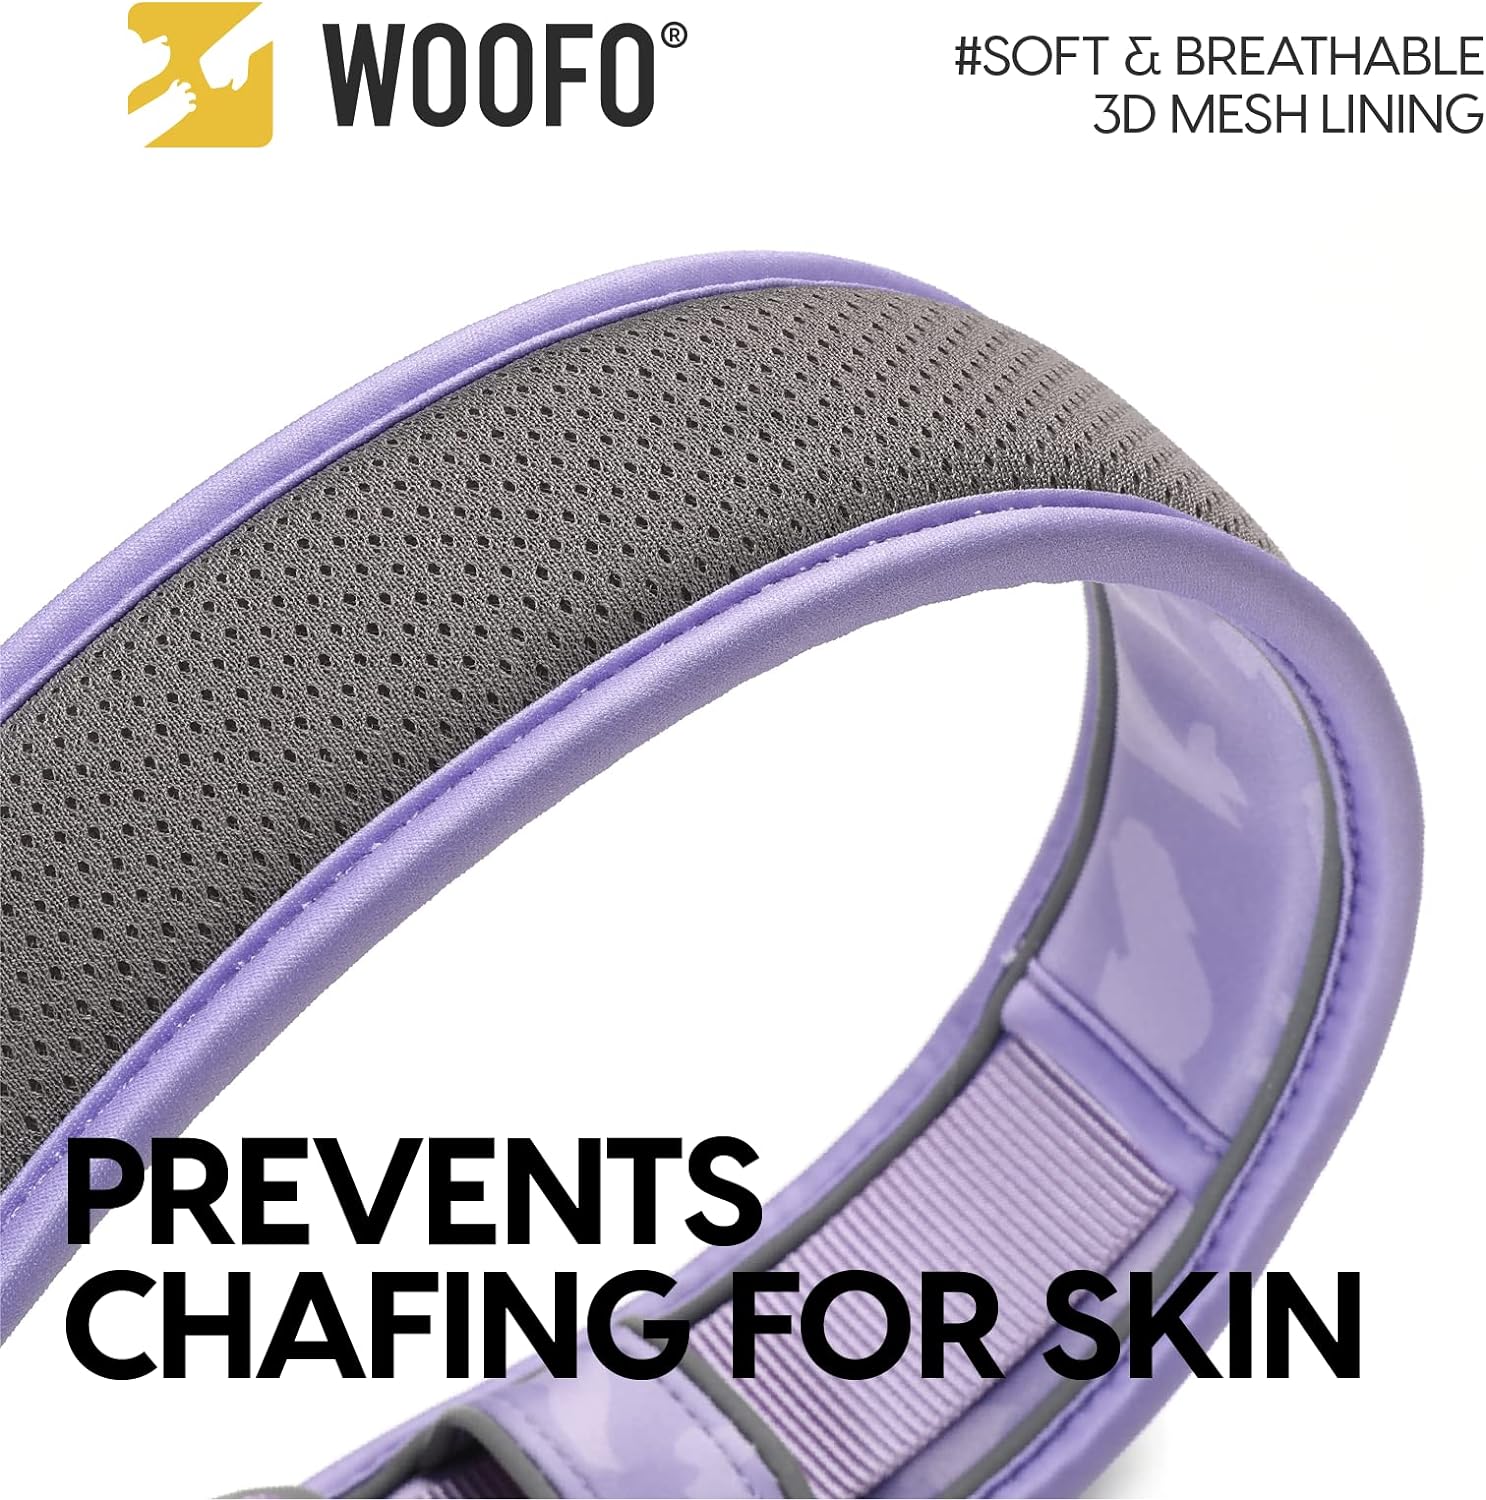 WOOFO Premium Dog Collar | Super Adjustable for All Breeds, Quick Release Buckle | Extra Soft and Widened Padding  Reflective Trim Design for Safety (Medium, Violet)